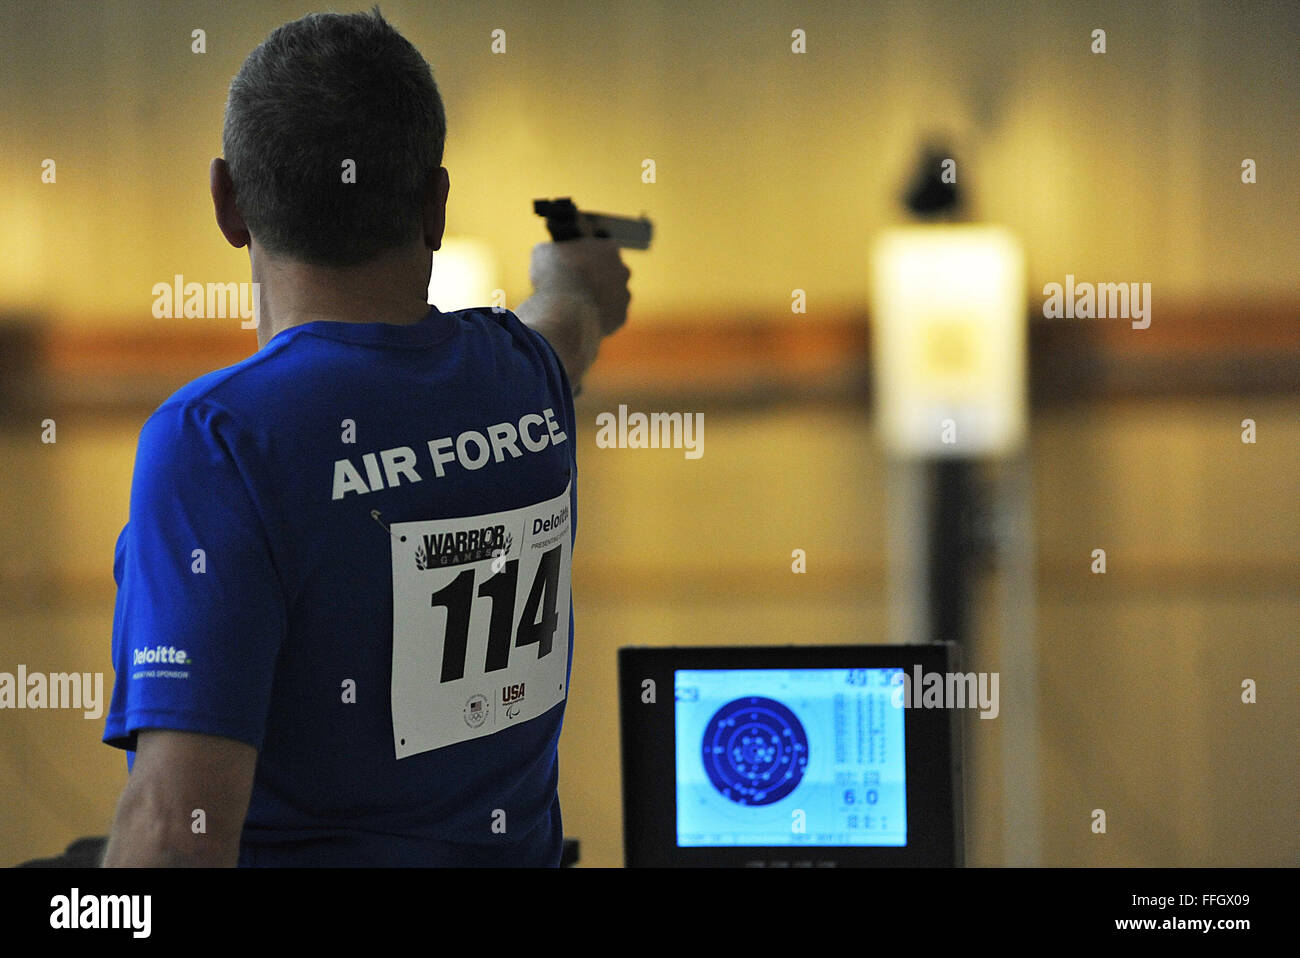 Maj. Greg Rich aims his pistol at his target during the shooting event Stock Photo